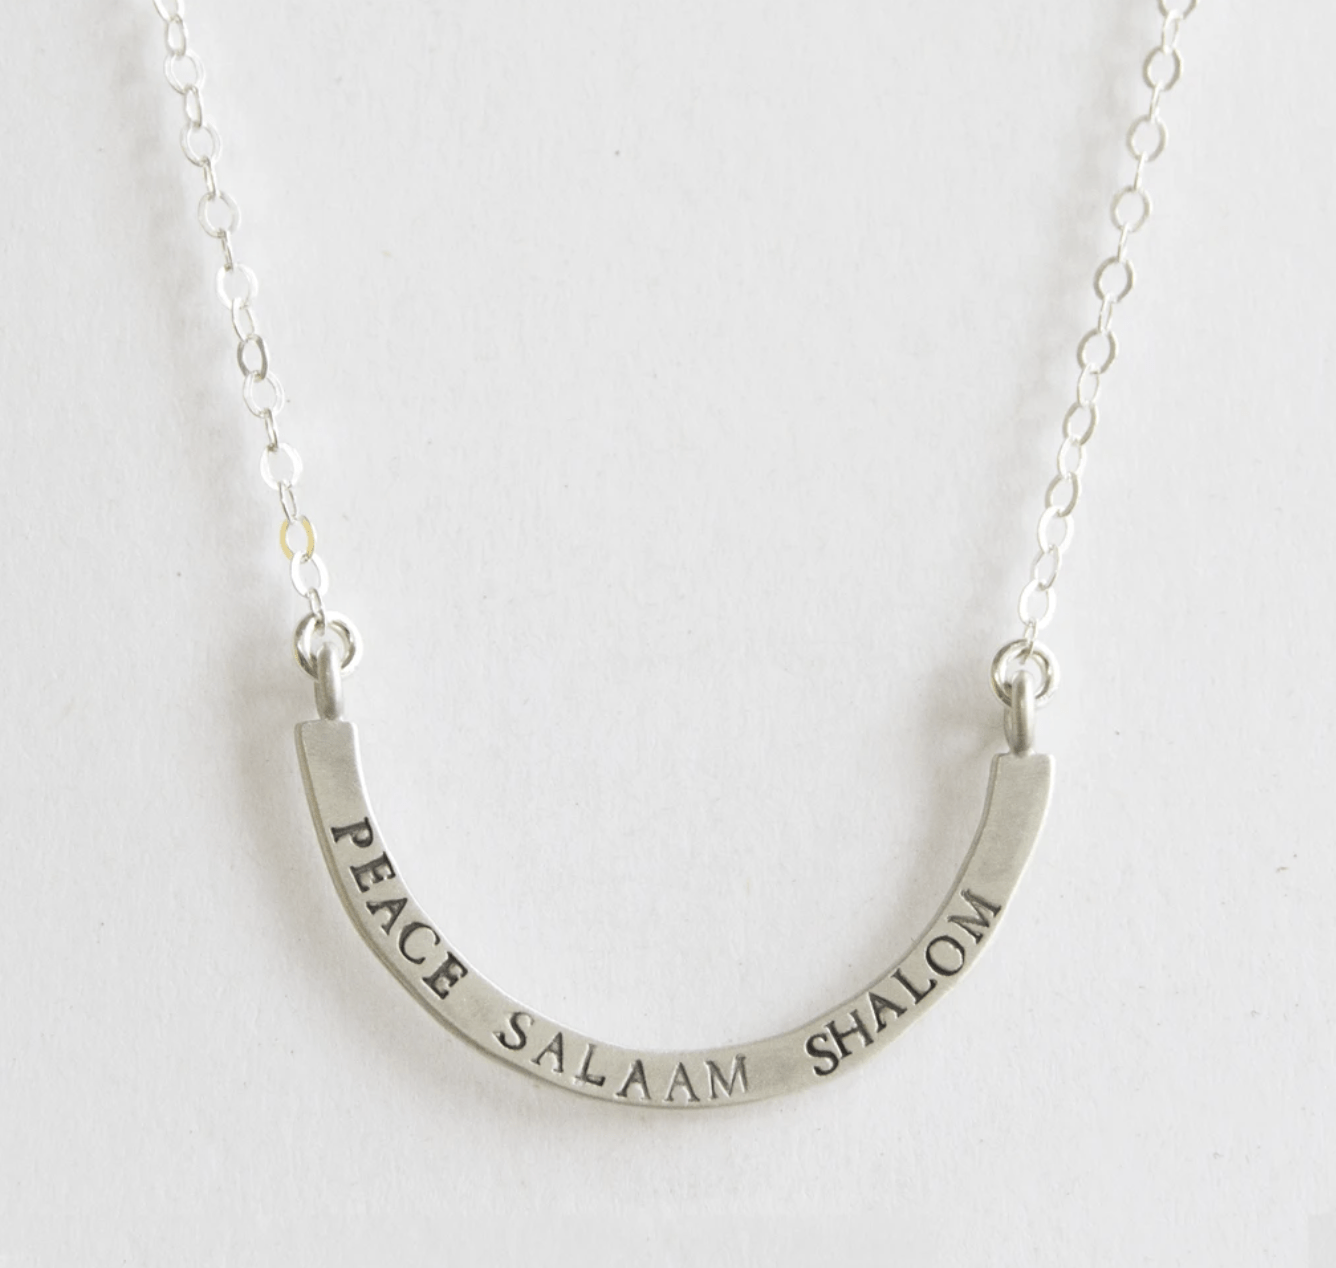 Emily Rosenfeld Necklaces Silver Peace, Salaam, Shalom Cup Half Full Necklace by Emily Rosenfeld